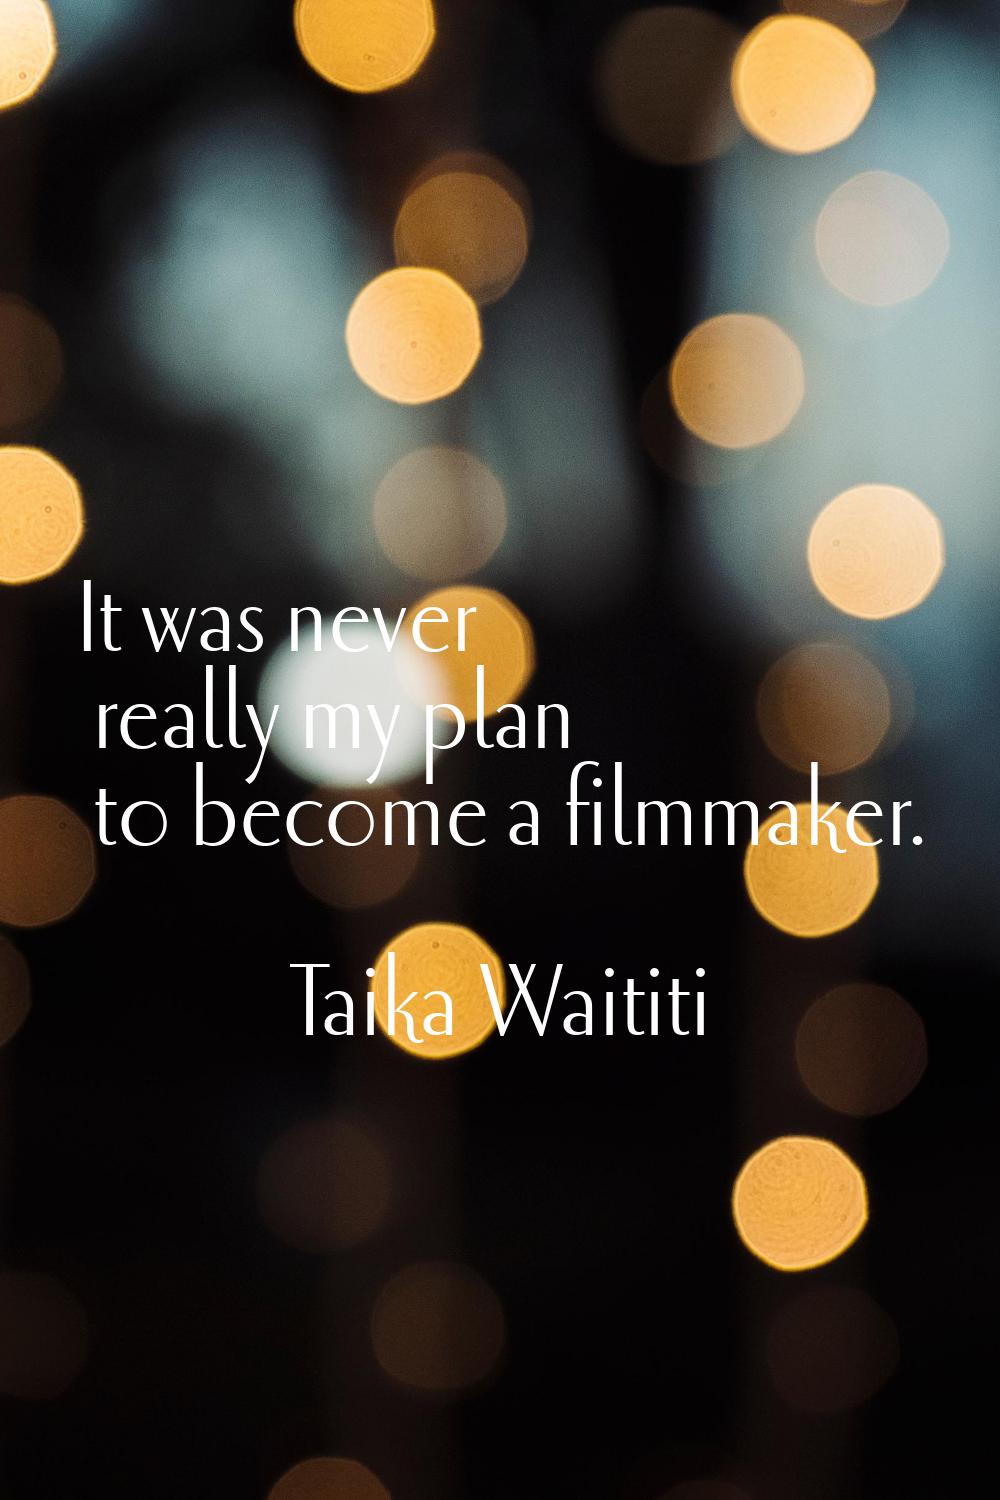 It was never really my plan to become a filmmaker.